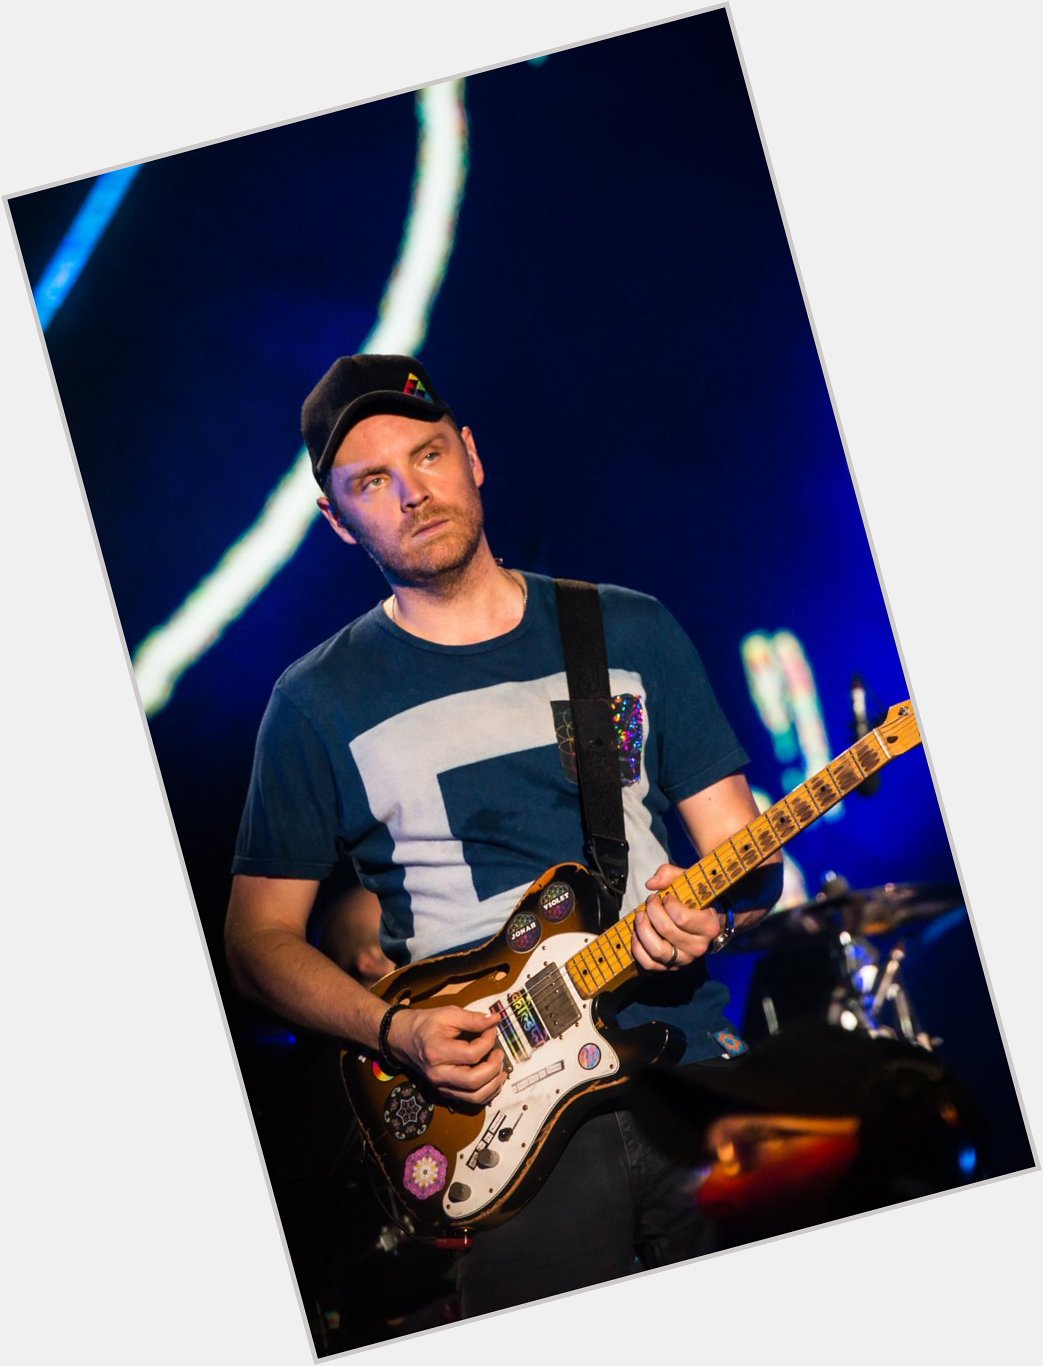 Happy Birthday to the most important member of Coldplay!!!!!!
Jonny Buckland 